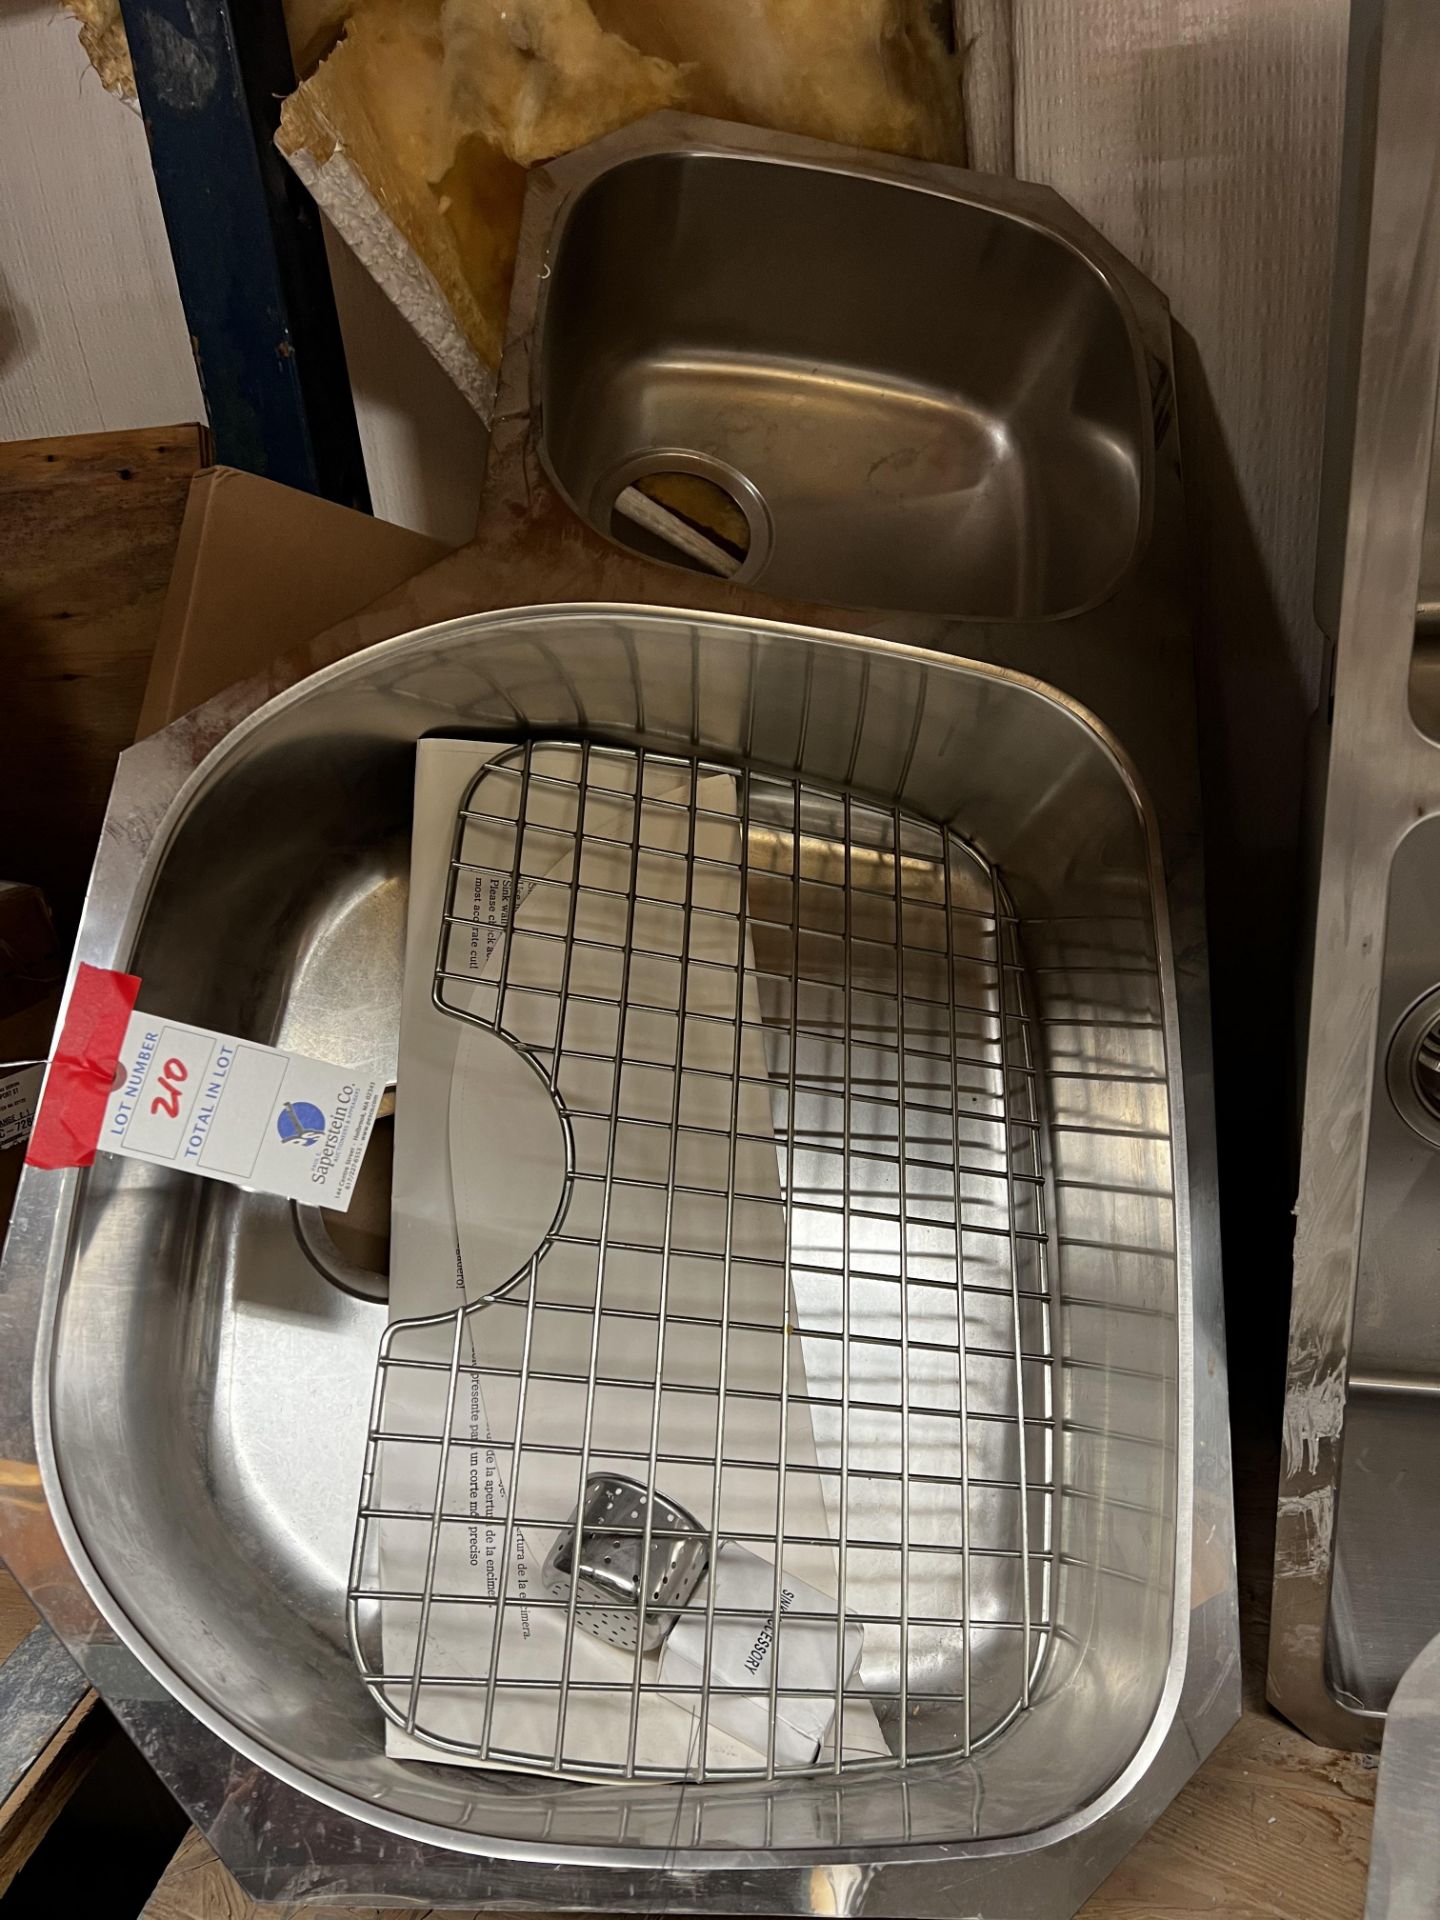 34"x18" Two Bay SS Undermount Sink with 1 Grate, Size Is Overall